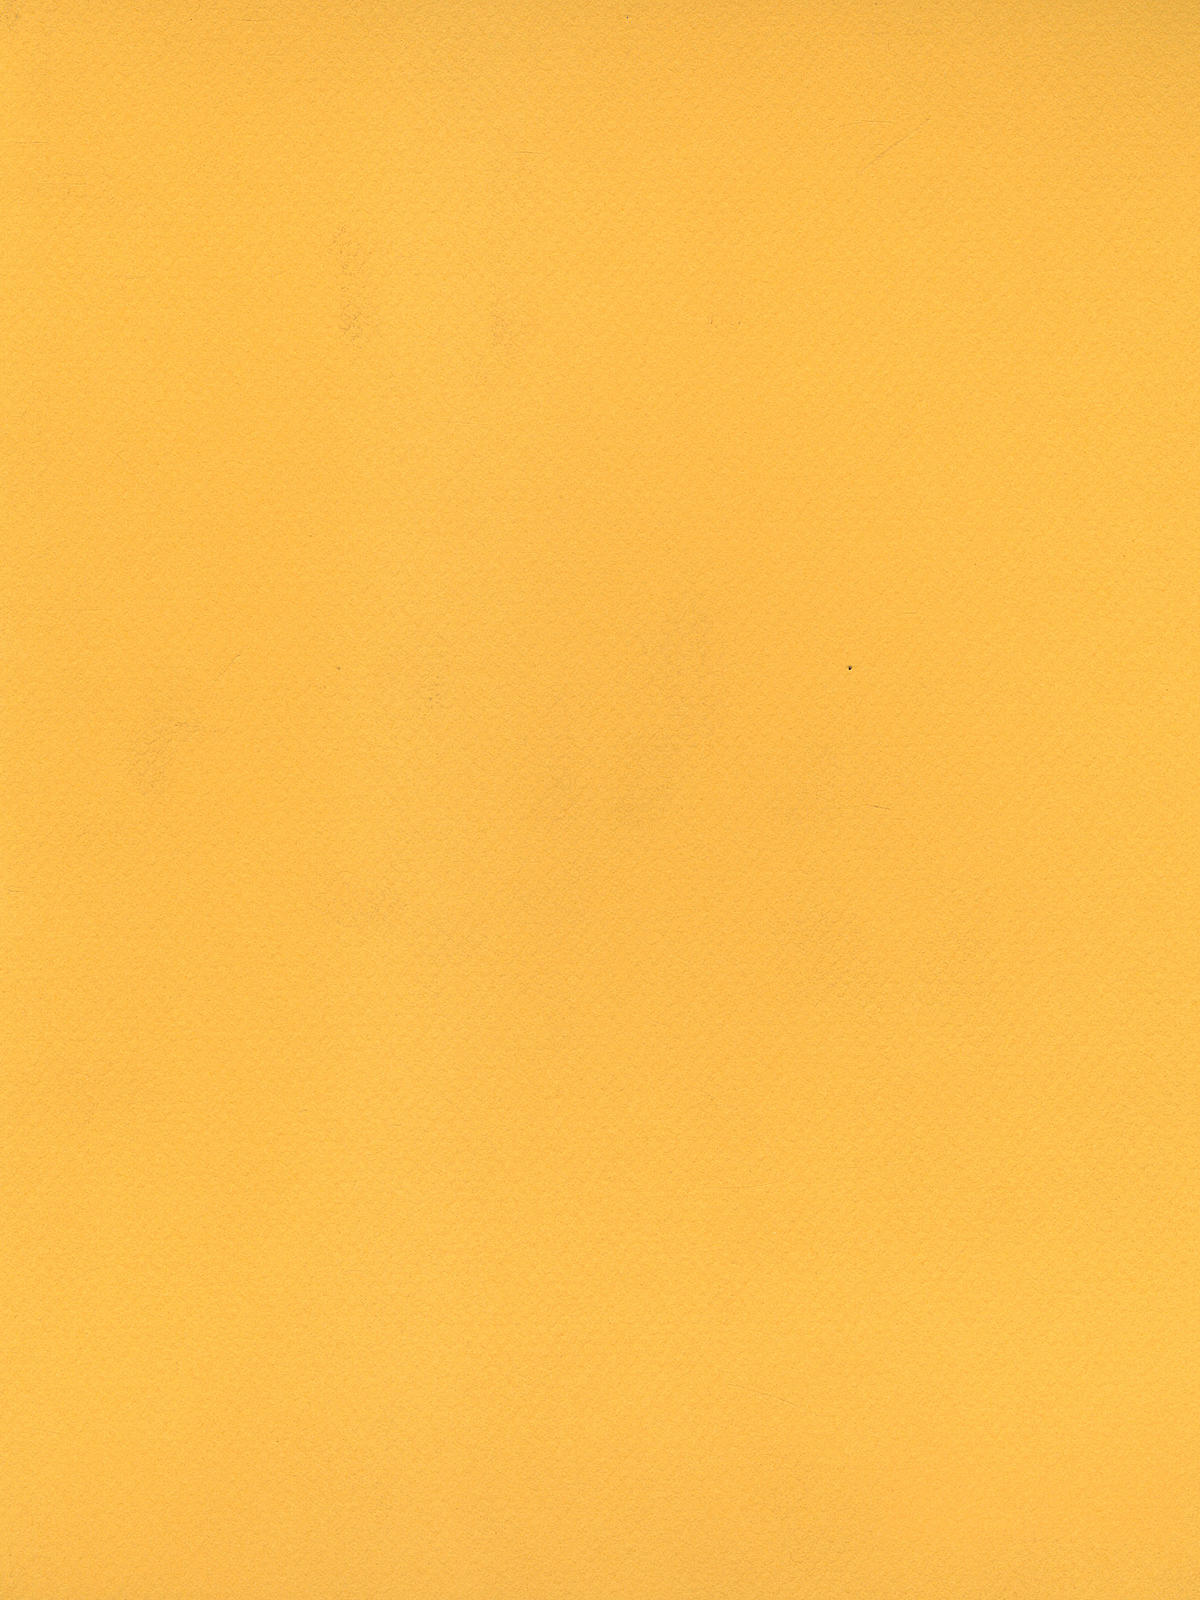 Mi-teintes Tinted Paper Canary 8.5 In. X 11 In.